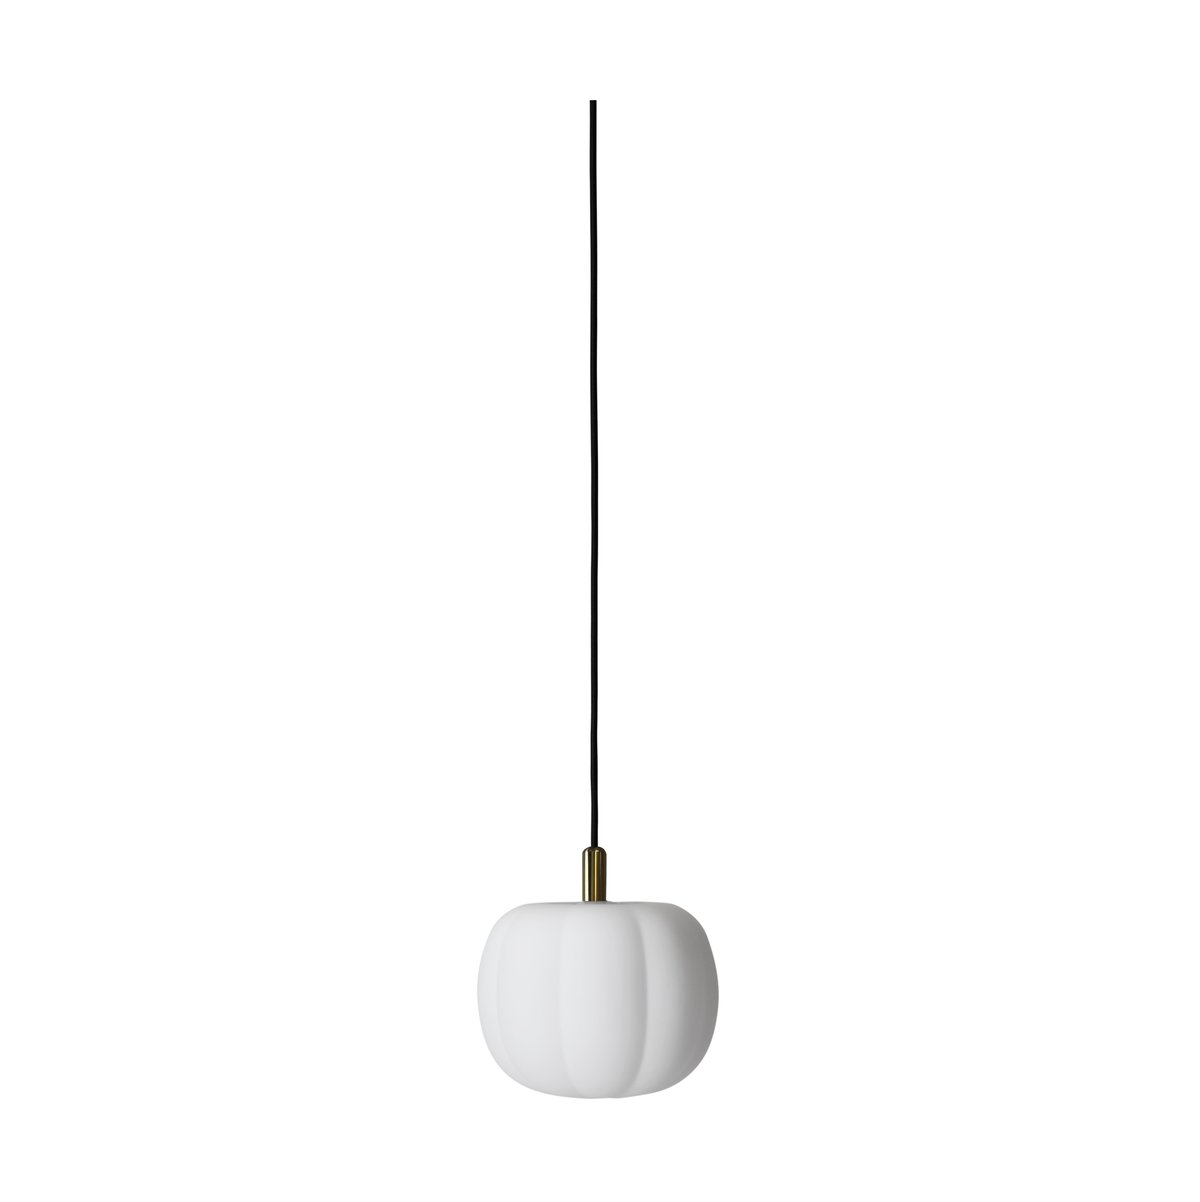 Made By Hand PePo Small hanglamp Ø20 cm Opal-brass top